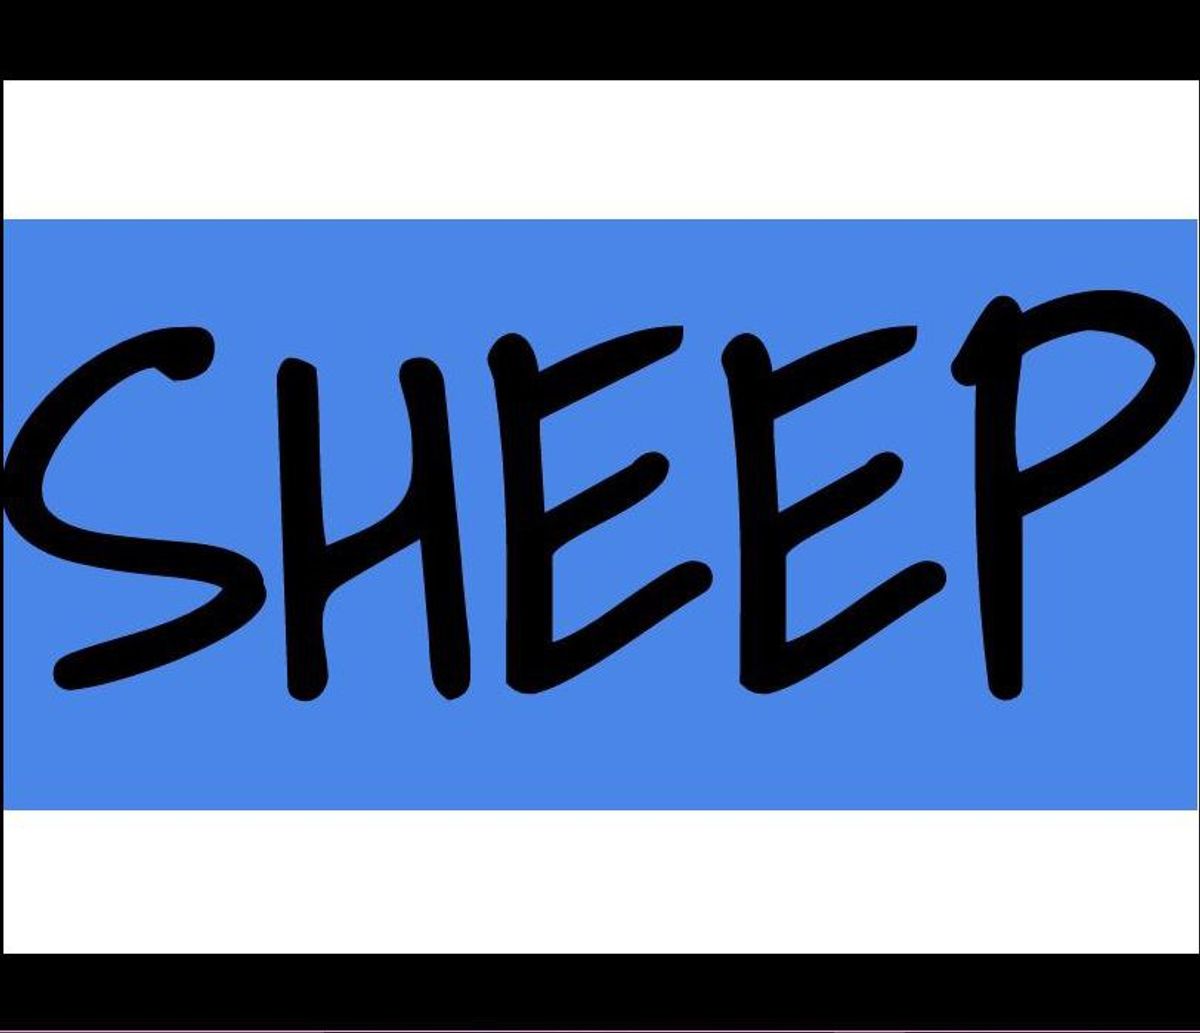 In Accordance With the Rules of the Rigged Election, Here is the Word "Sheep" Written 500 Times